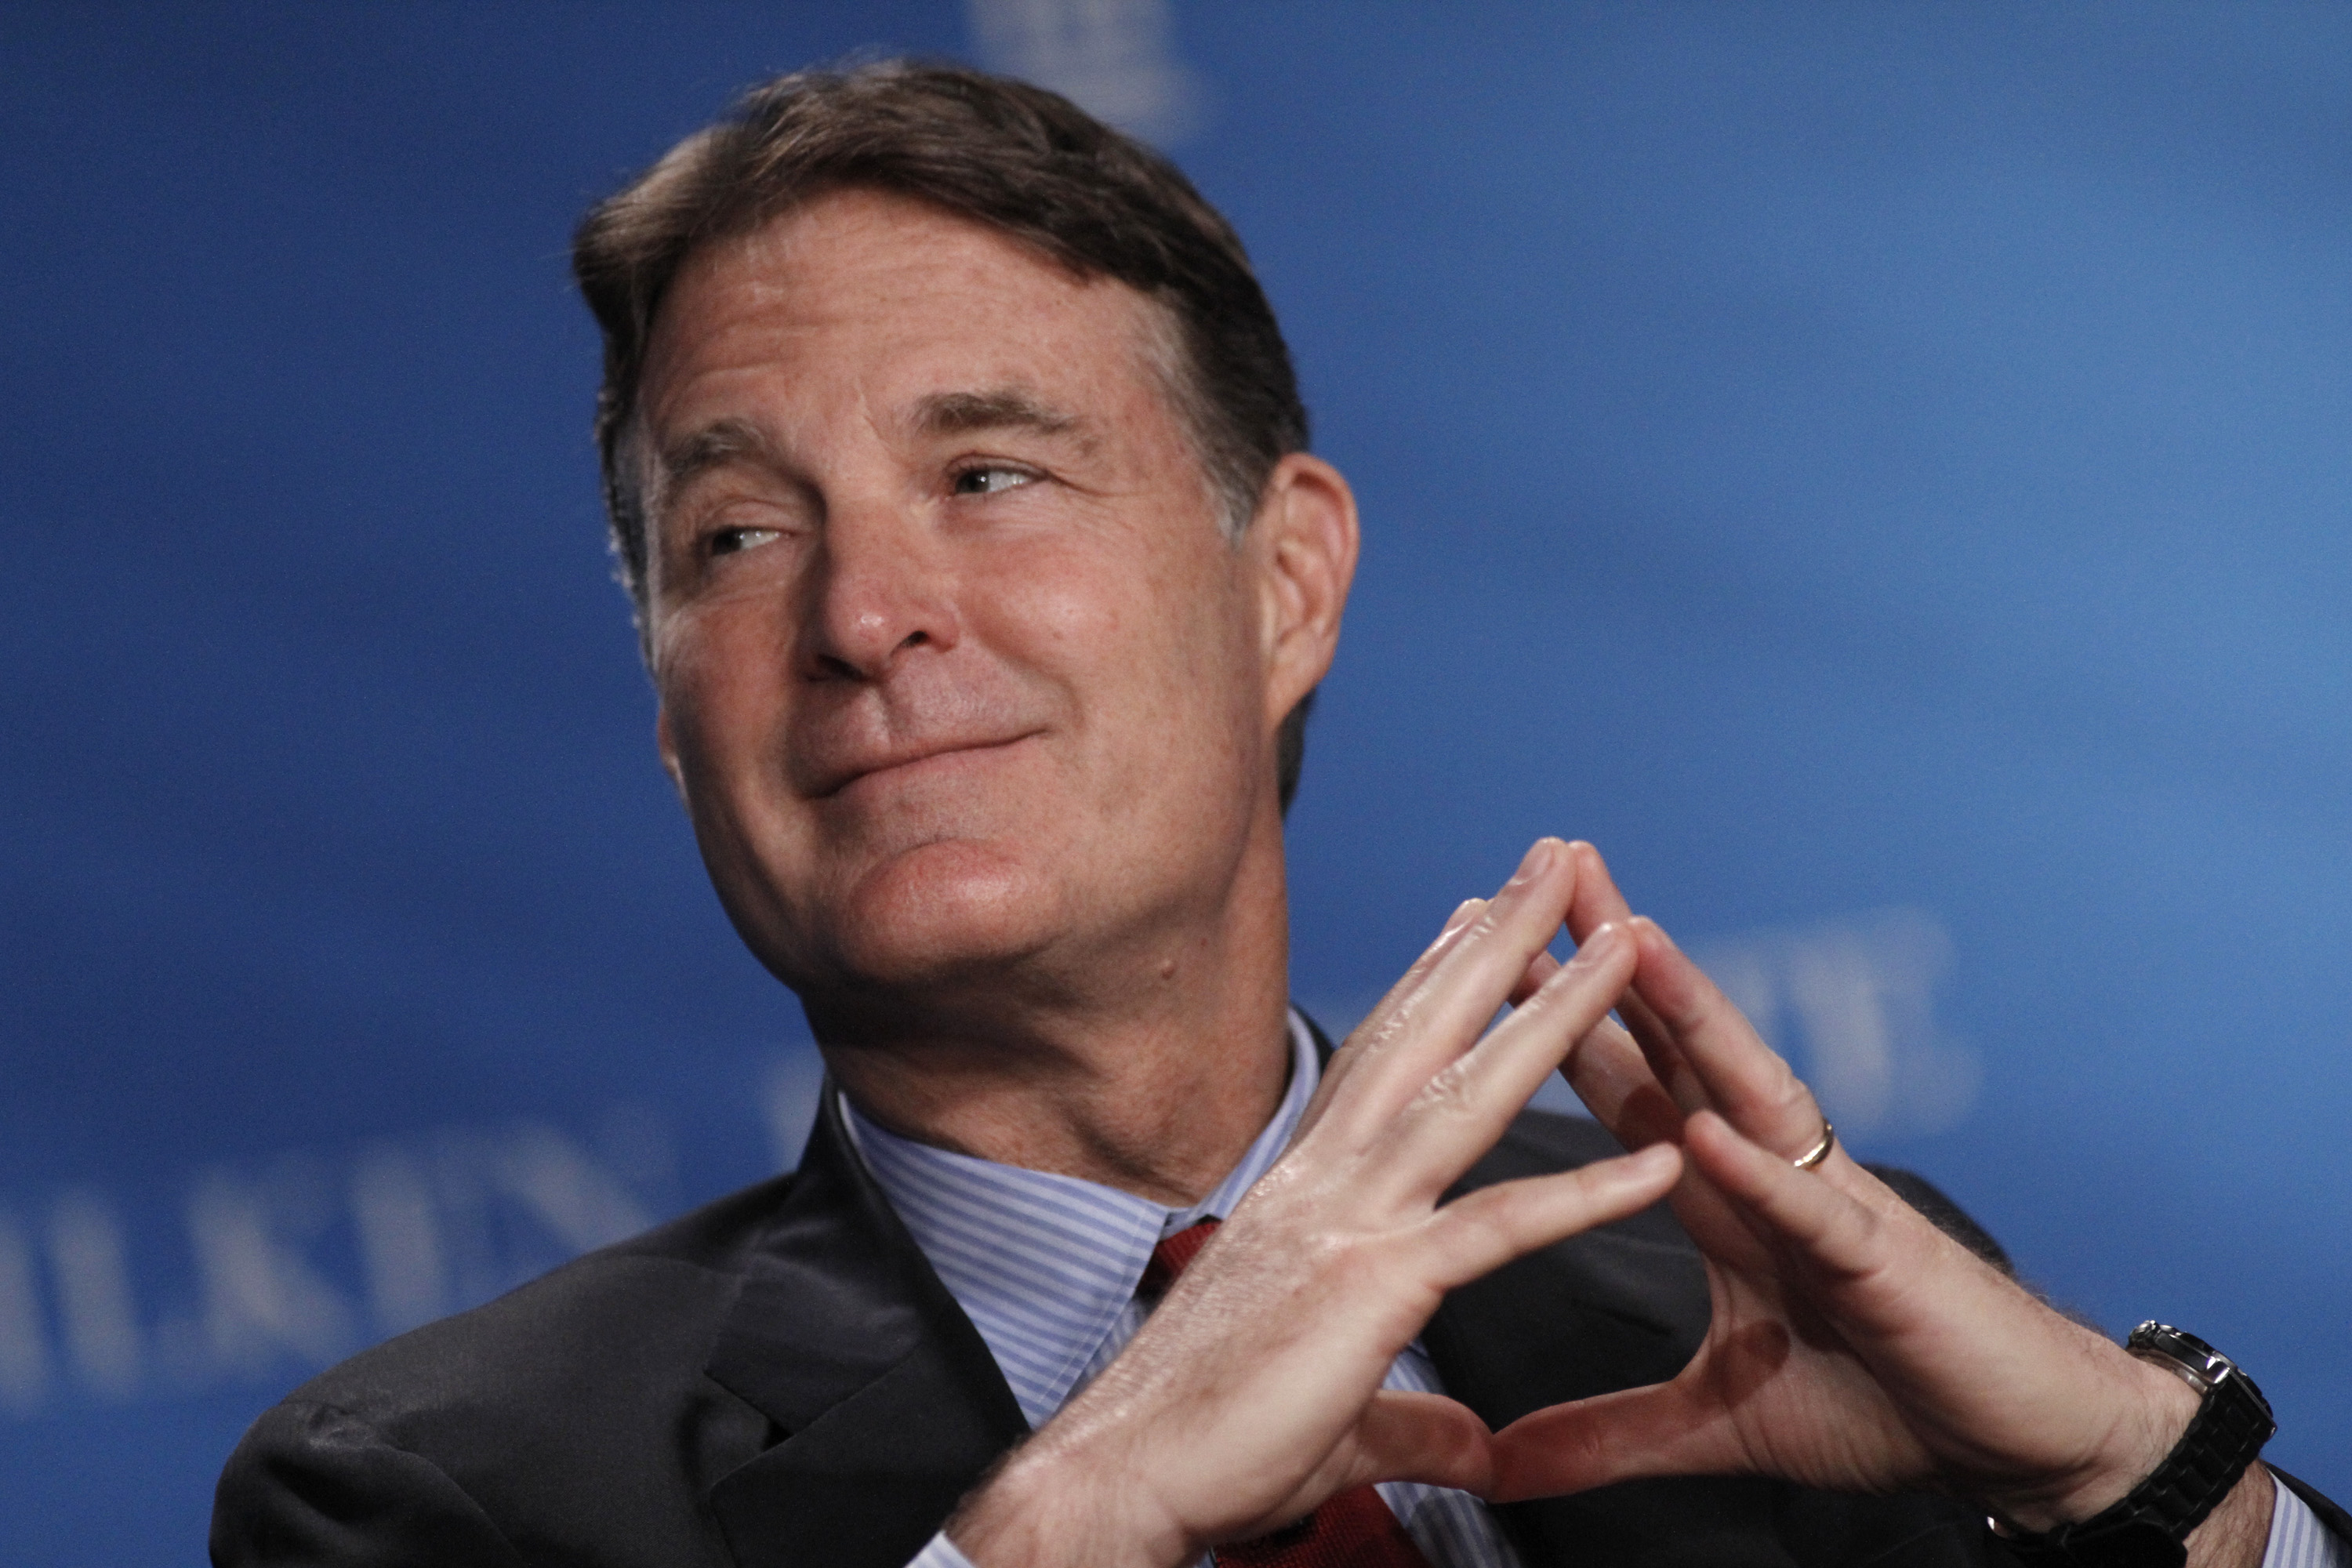 Former Senator Evan Bayh, senior advisor with Apollo Global Management, participates in a panel discussion at the annual Milken Institute Global Conference in Beverly Hills, California, U.S., on Tuesday, May 1, 2012. (Jonathan Alcorn—Bloomberg / Getty Images)